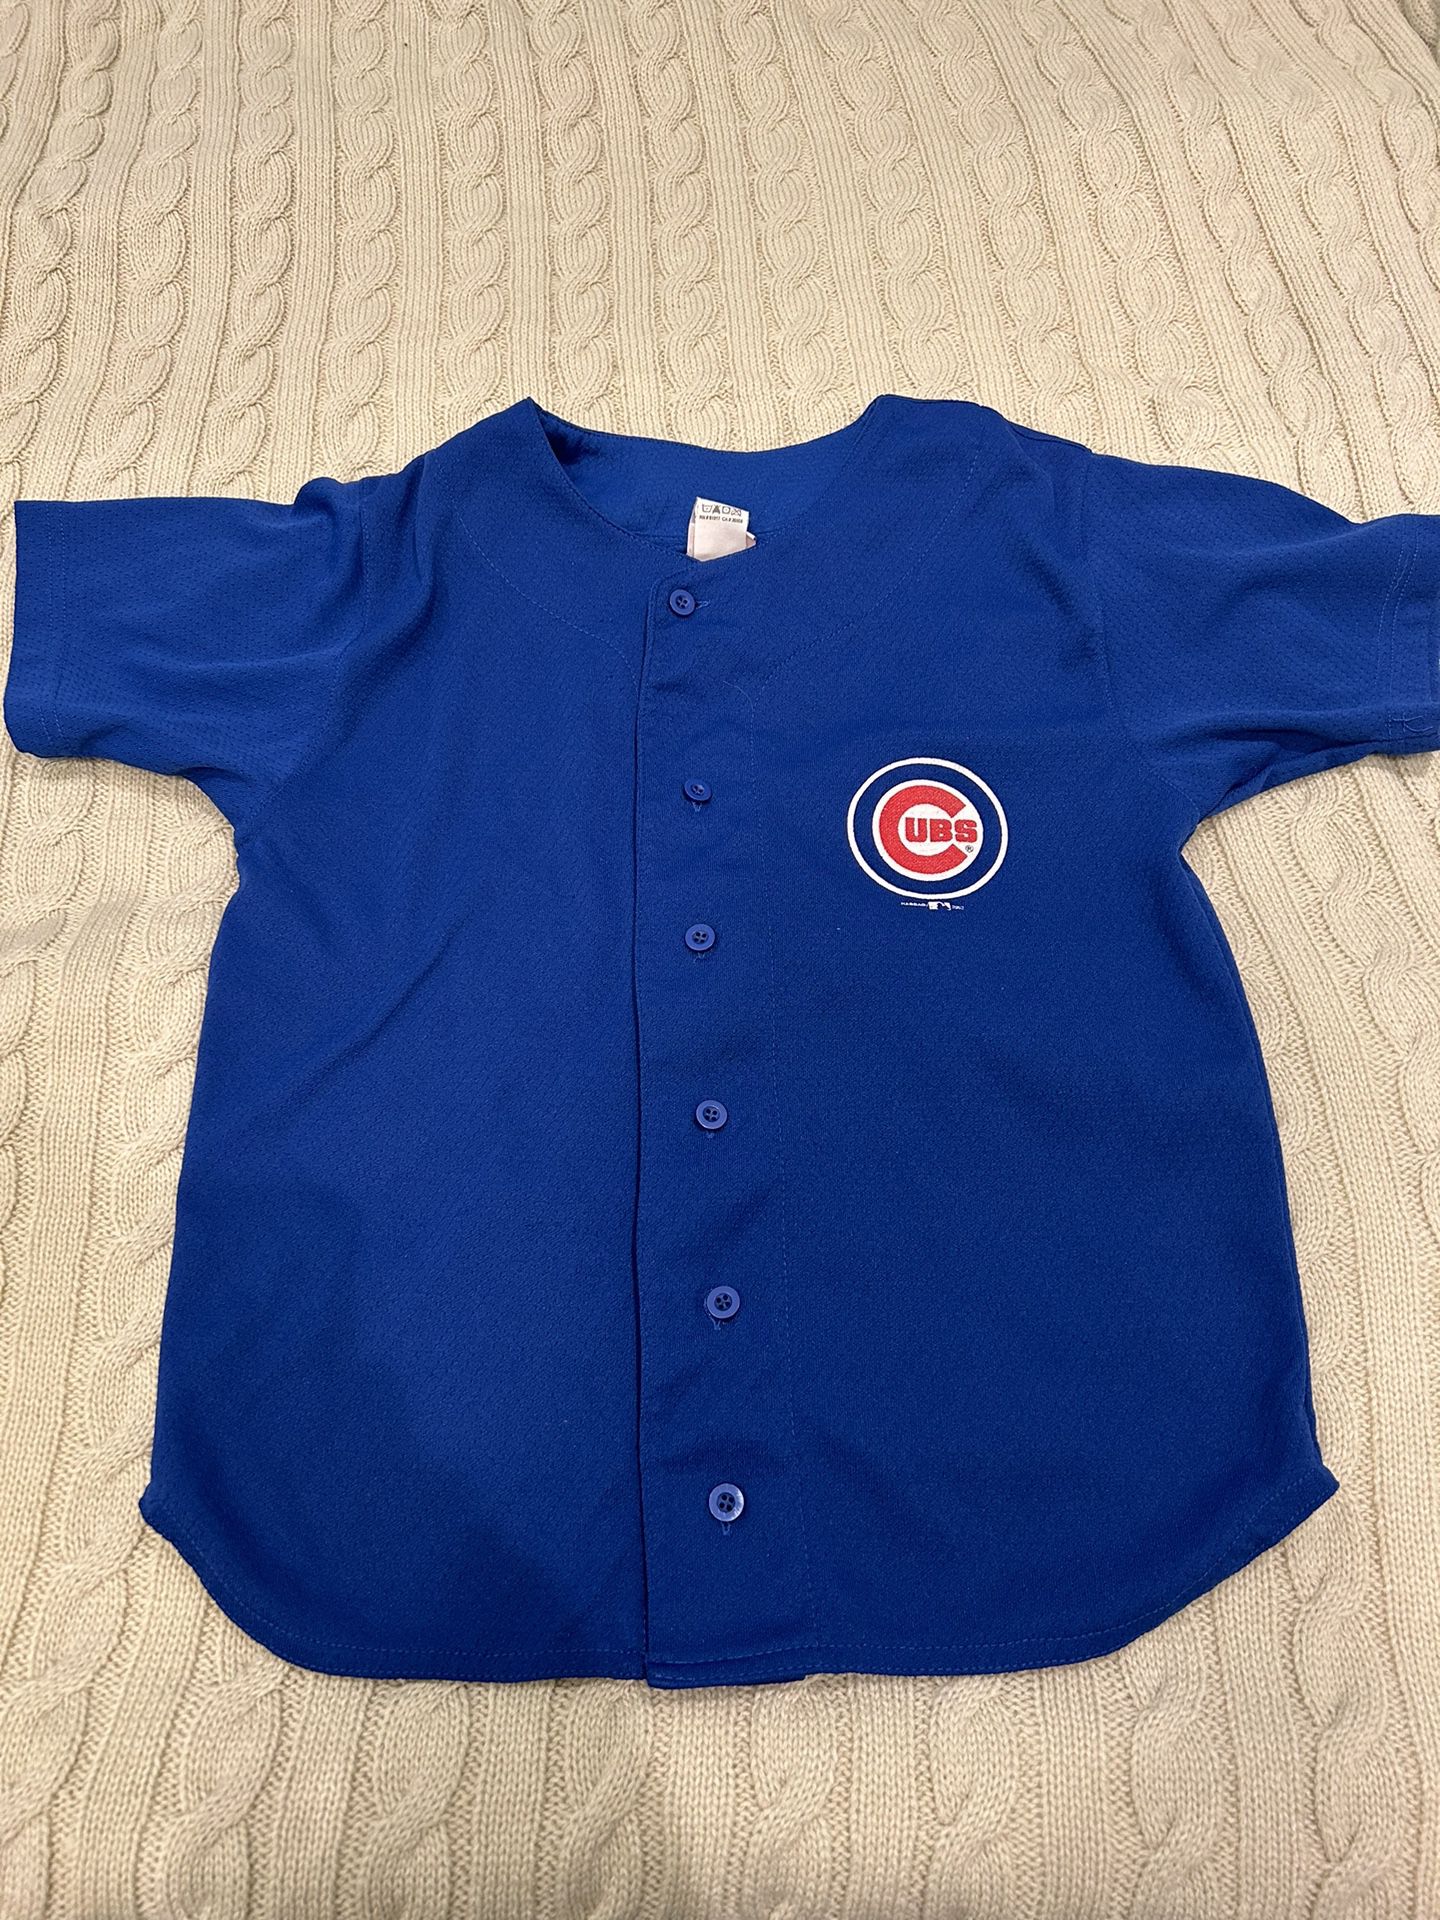 Cubs Jersey Kids Unisex Medium 10-12 for Sale in Chicago, IL - OfferUp